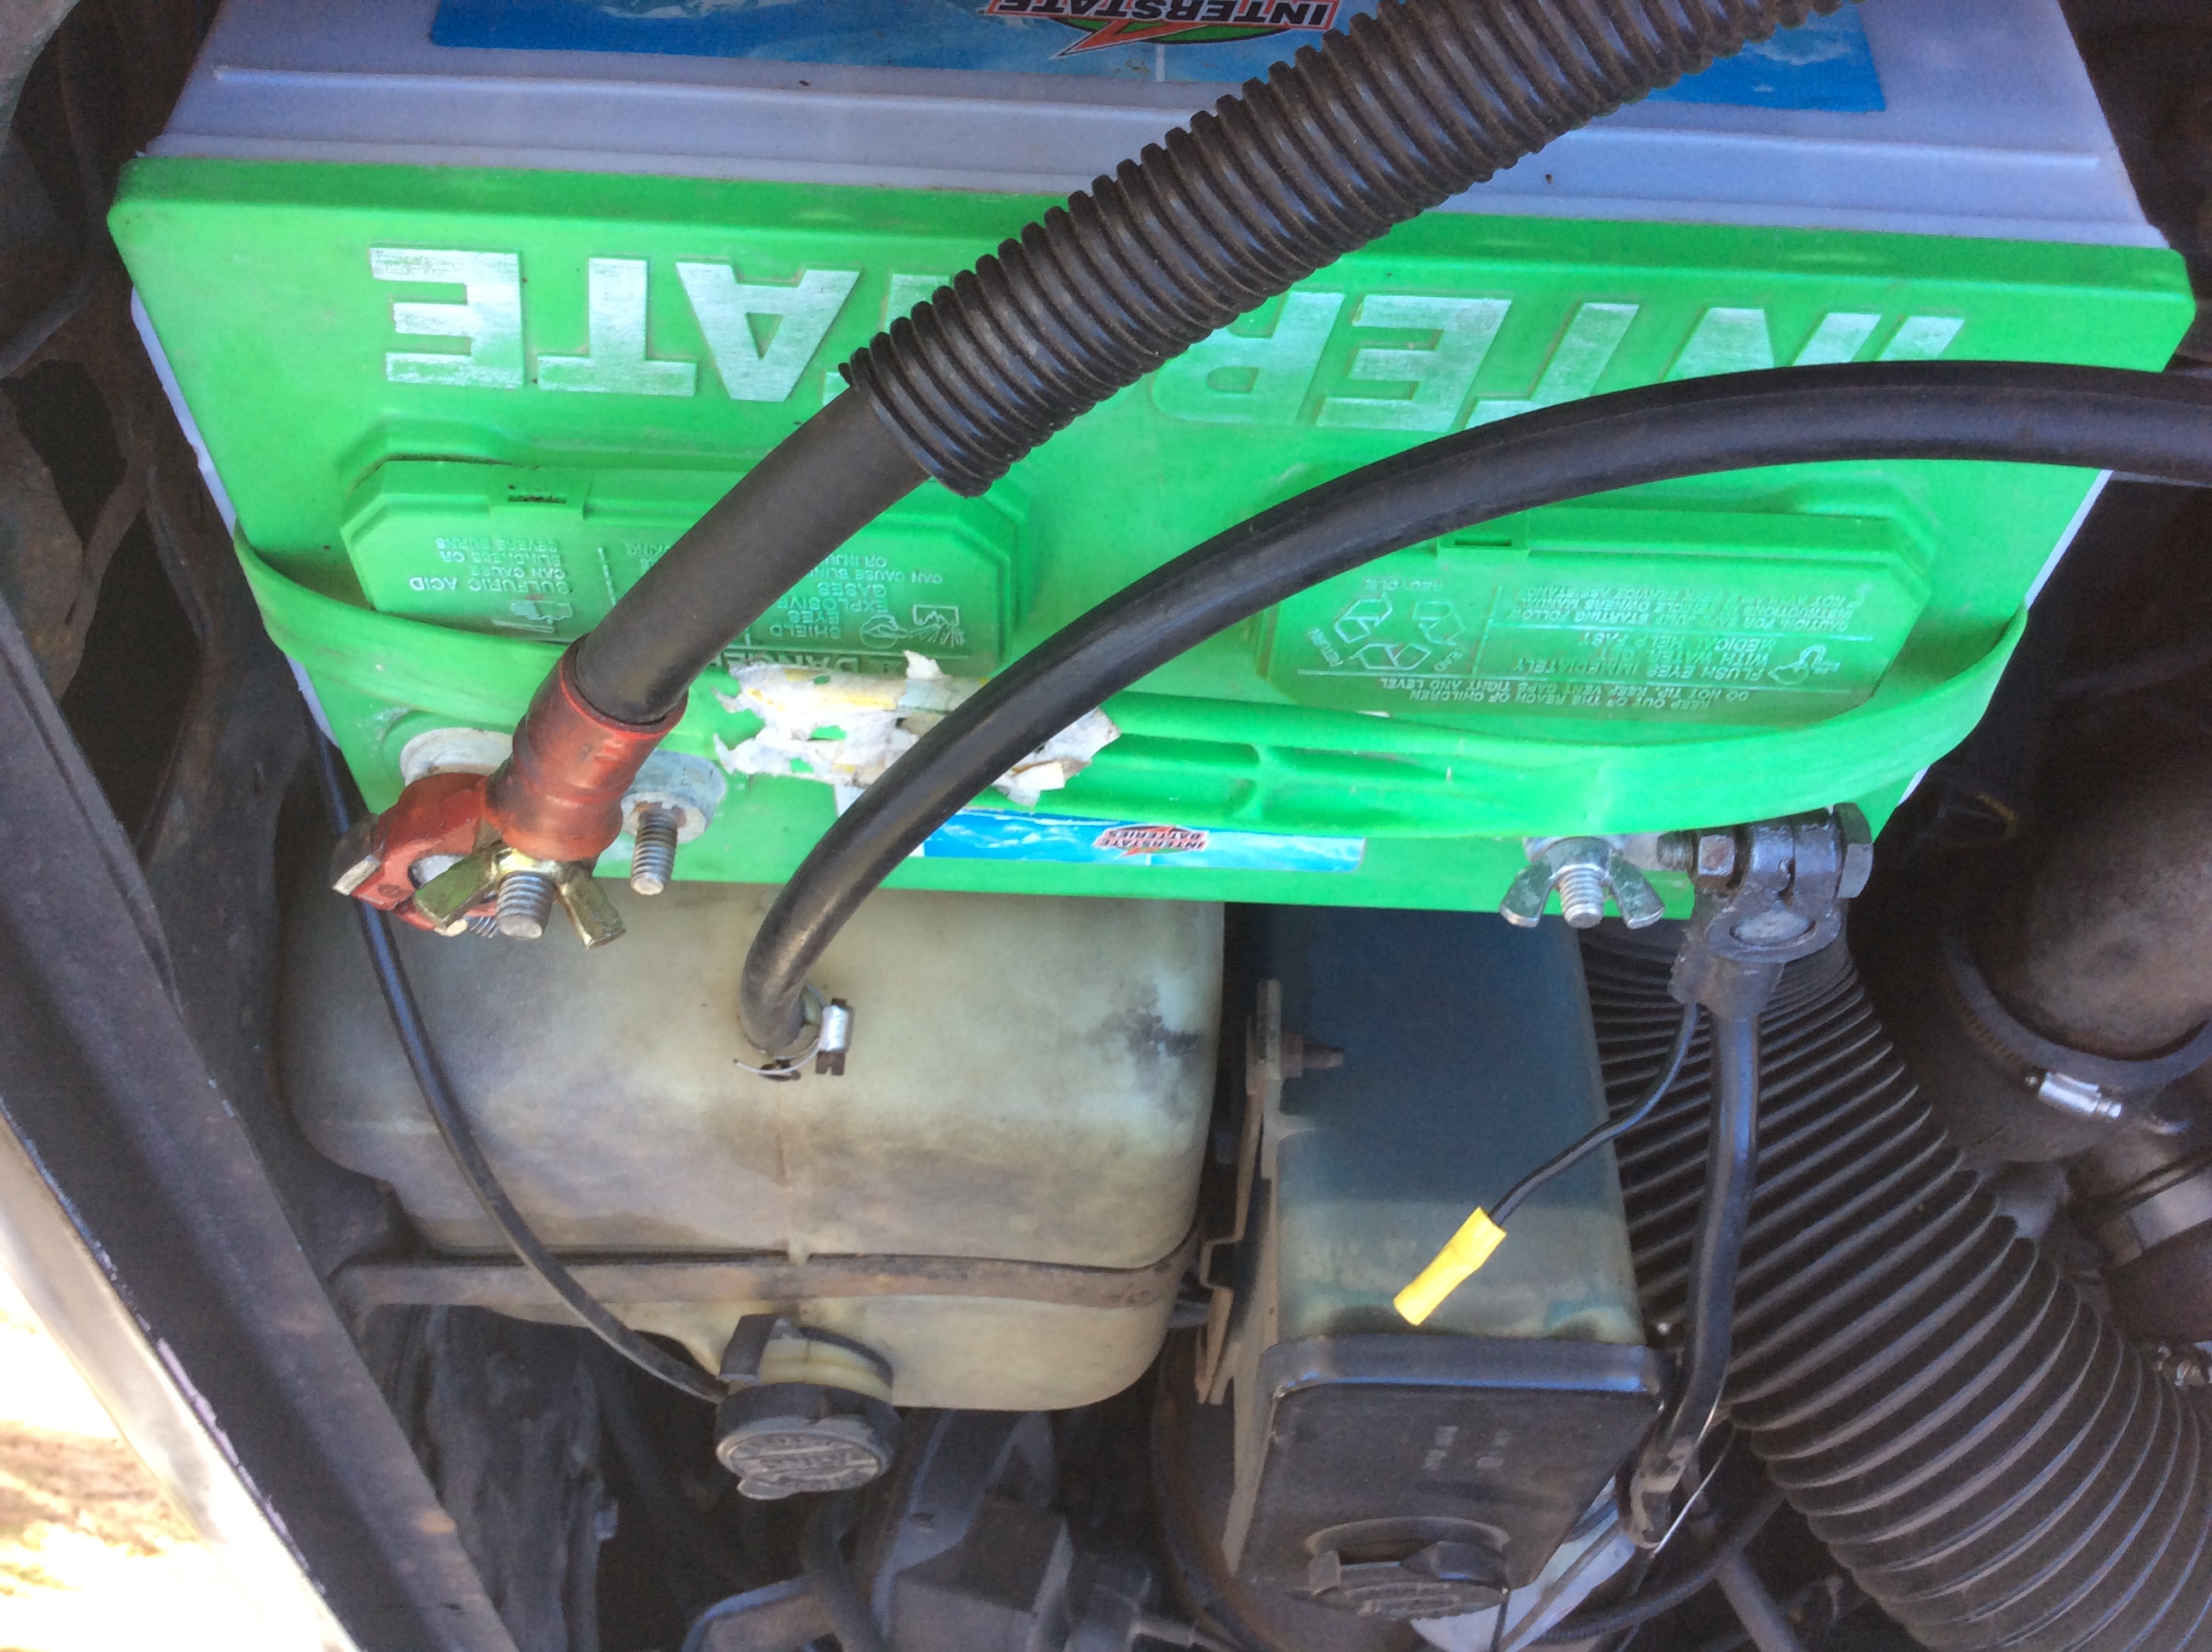 1985 ford f250 6.9 idi wiring help!!! - Ford Truck Enthusiasts Forums